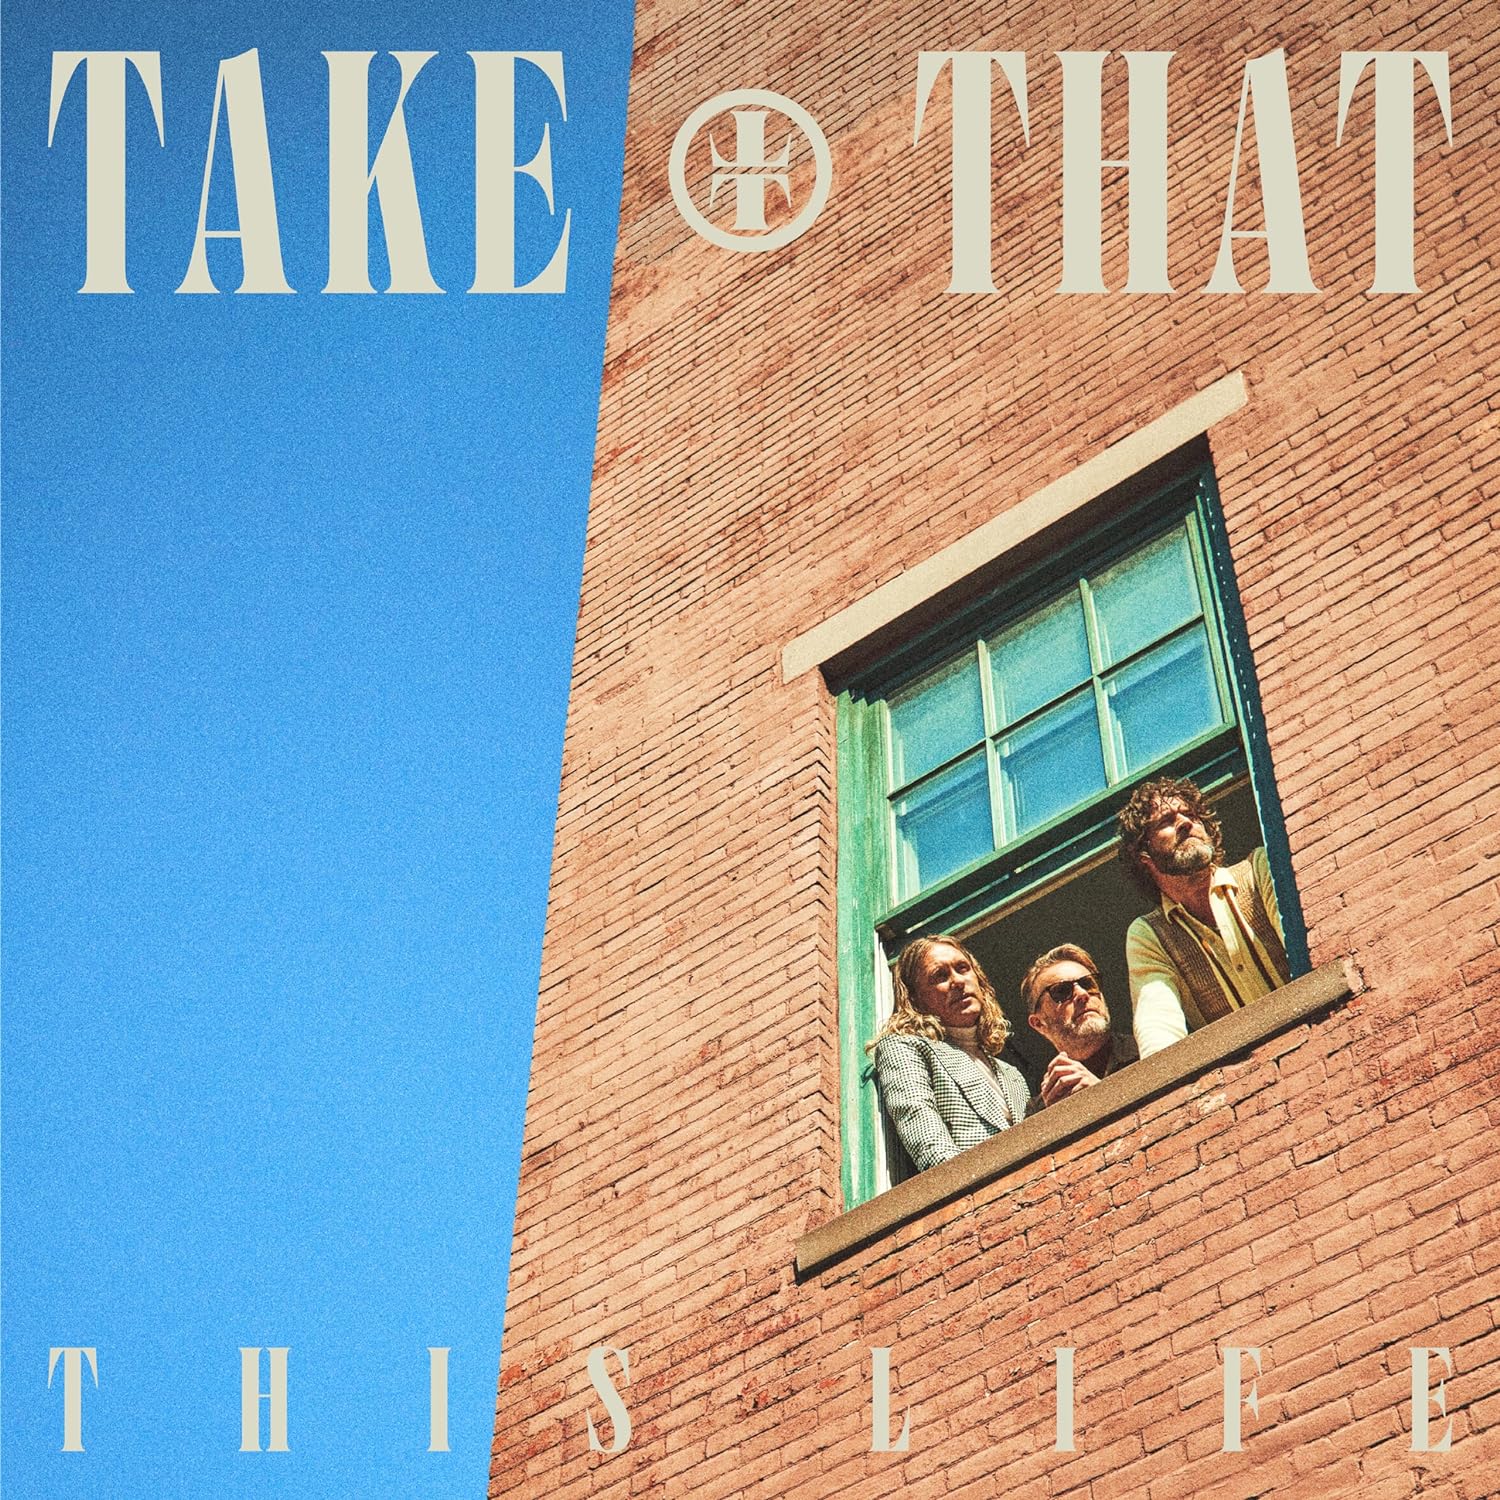 TAKE THAT – THIS LIFE deluxe CD2